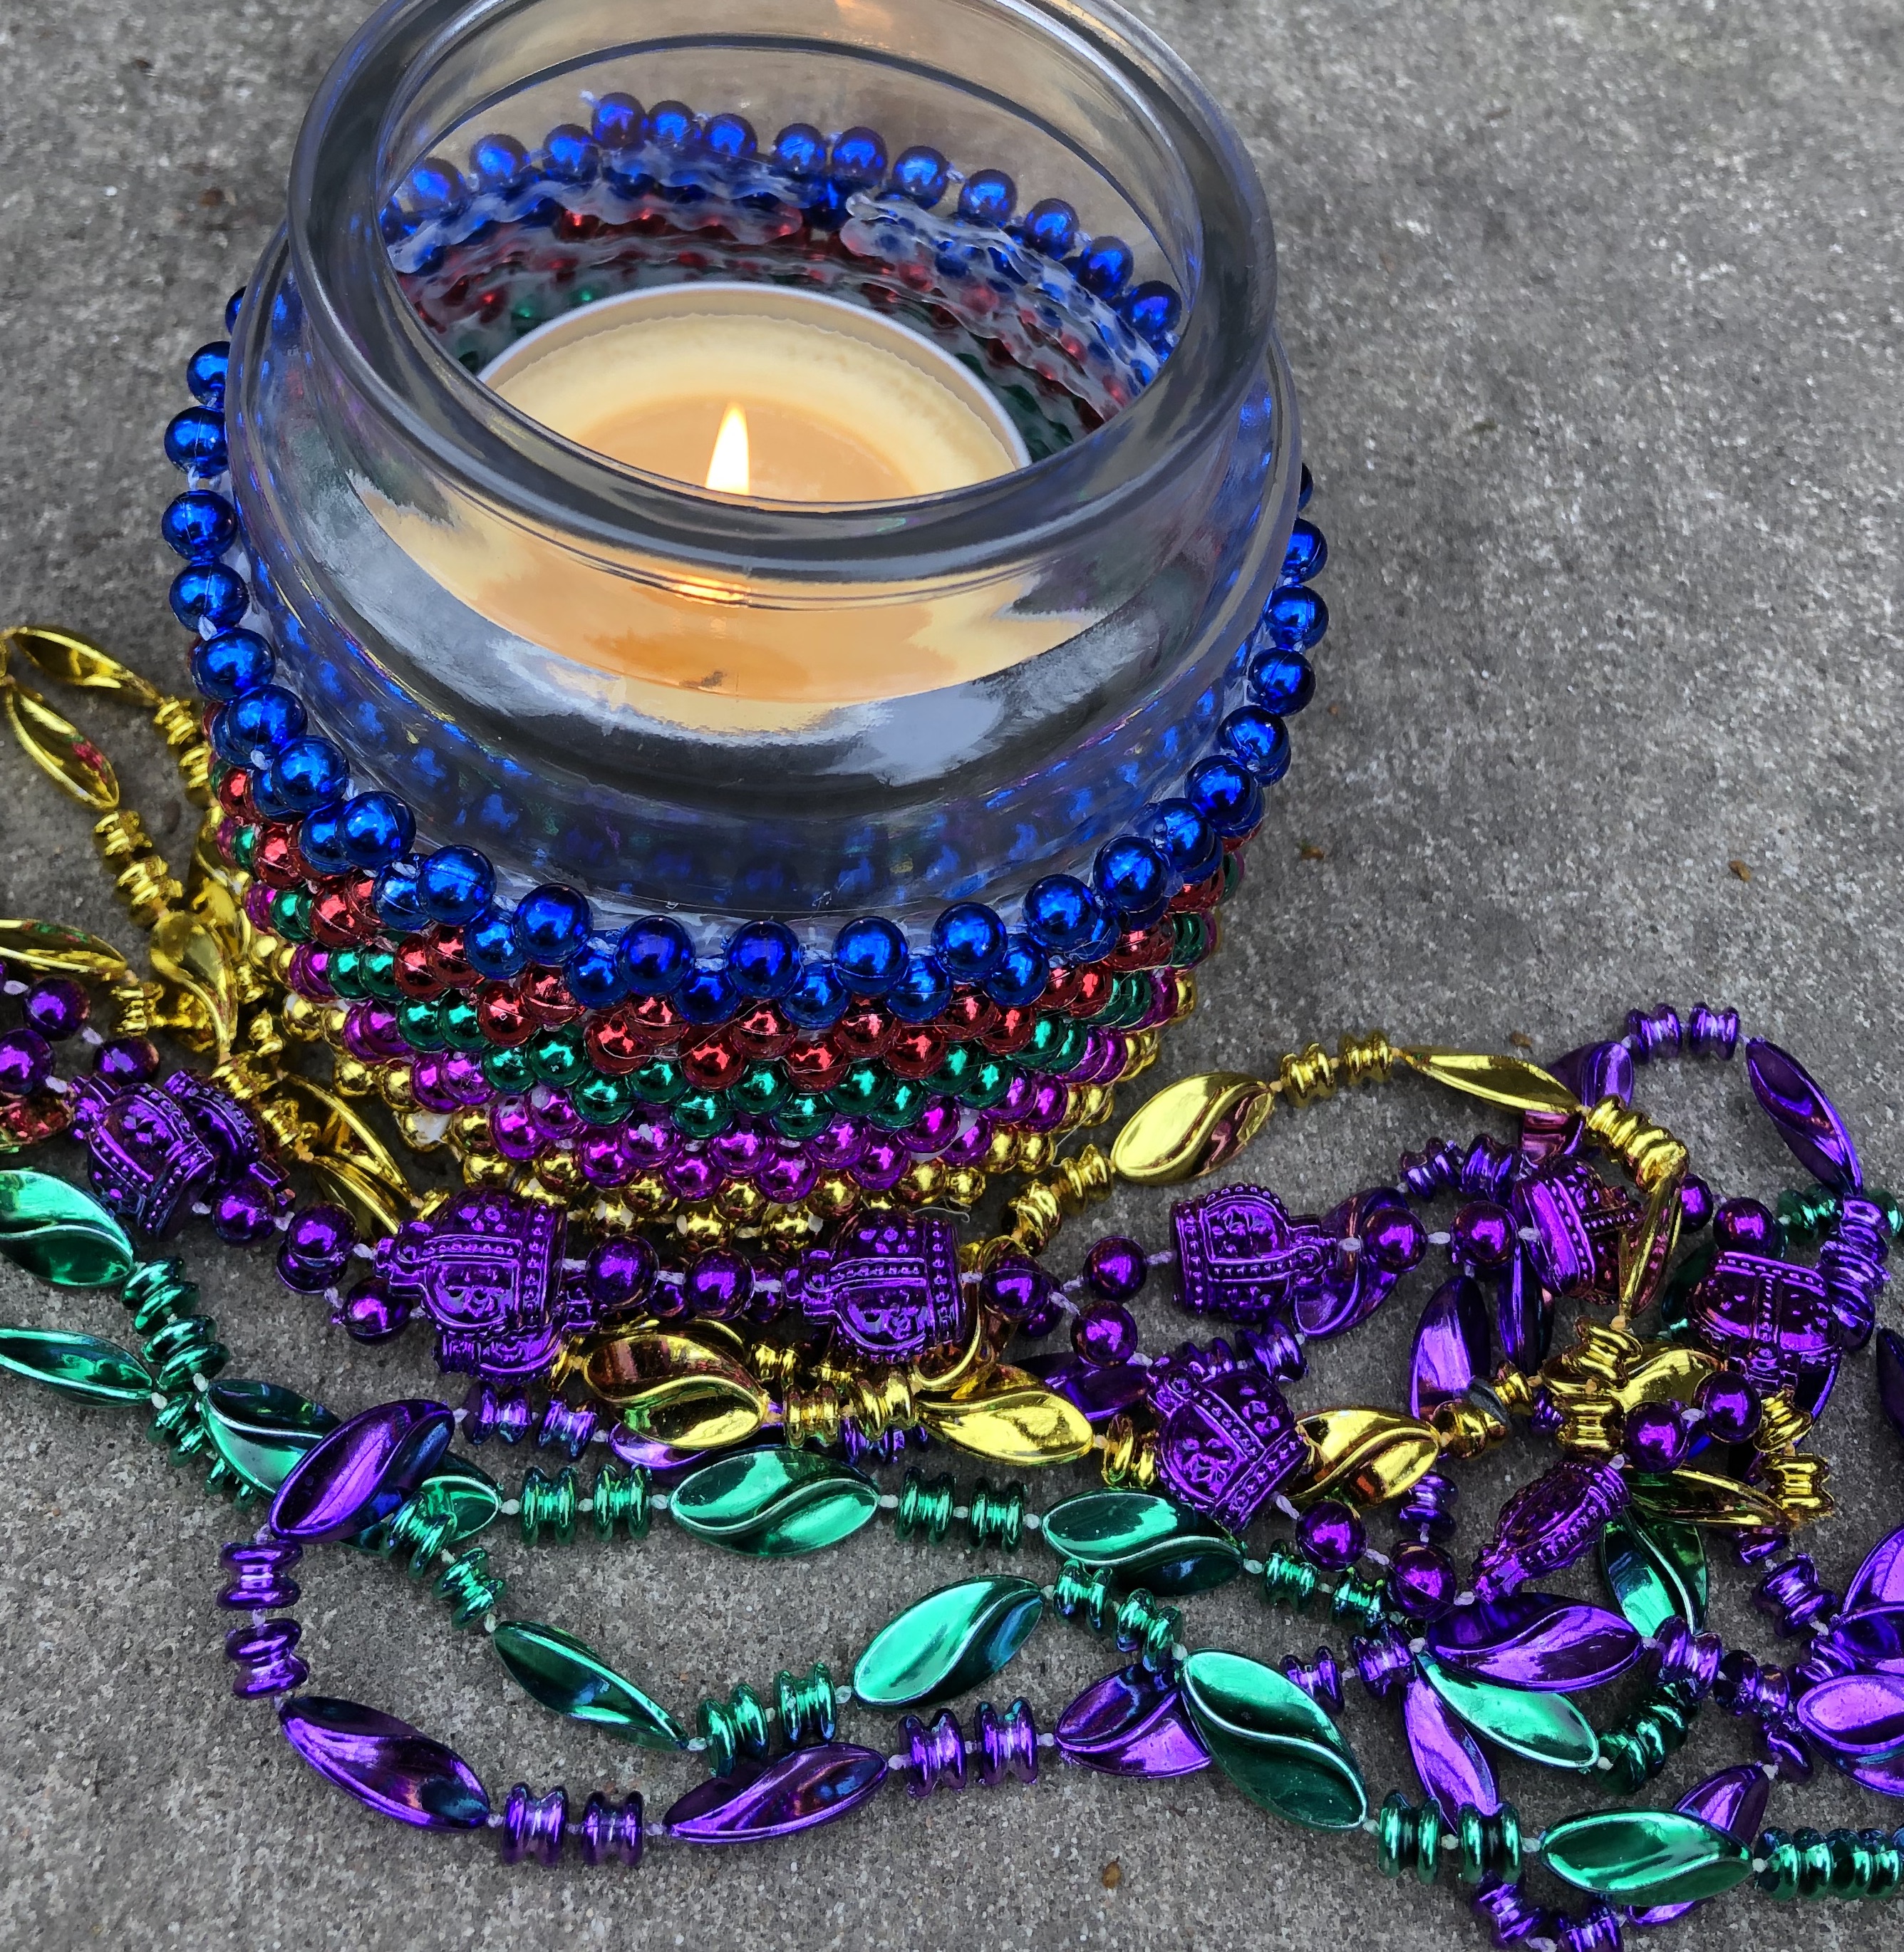 How to Make a Simple Mardi Gras Candle Jar